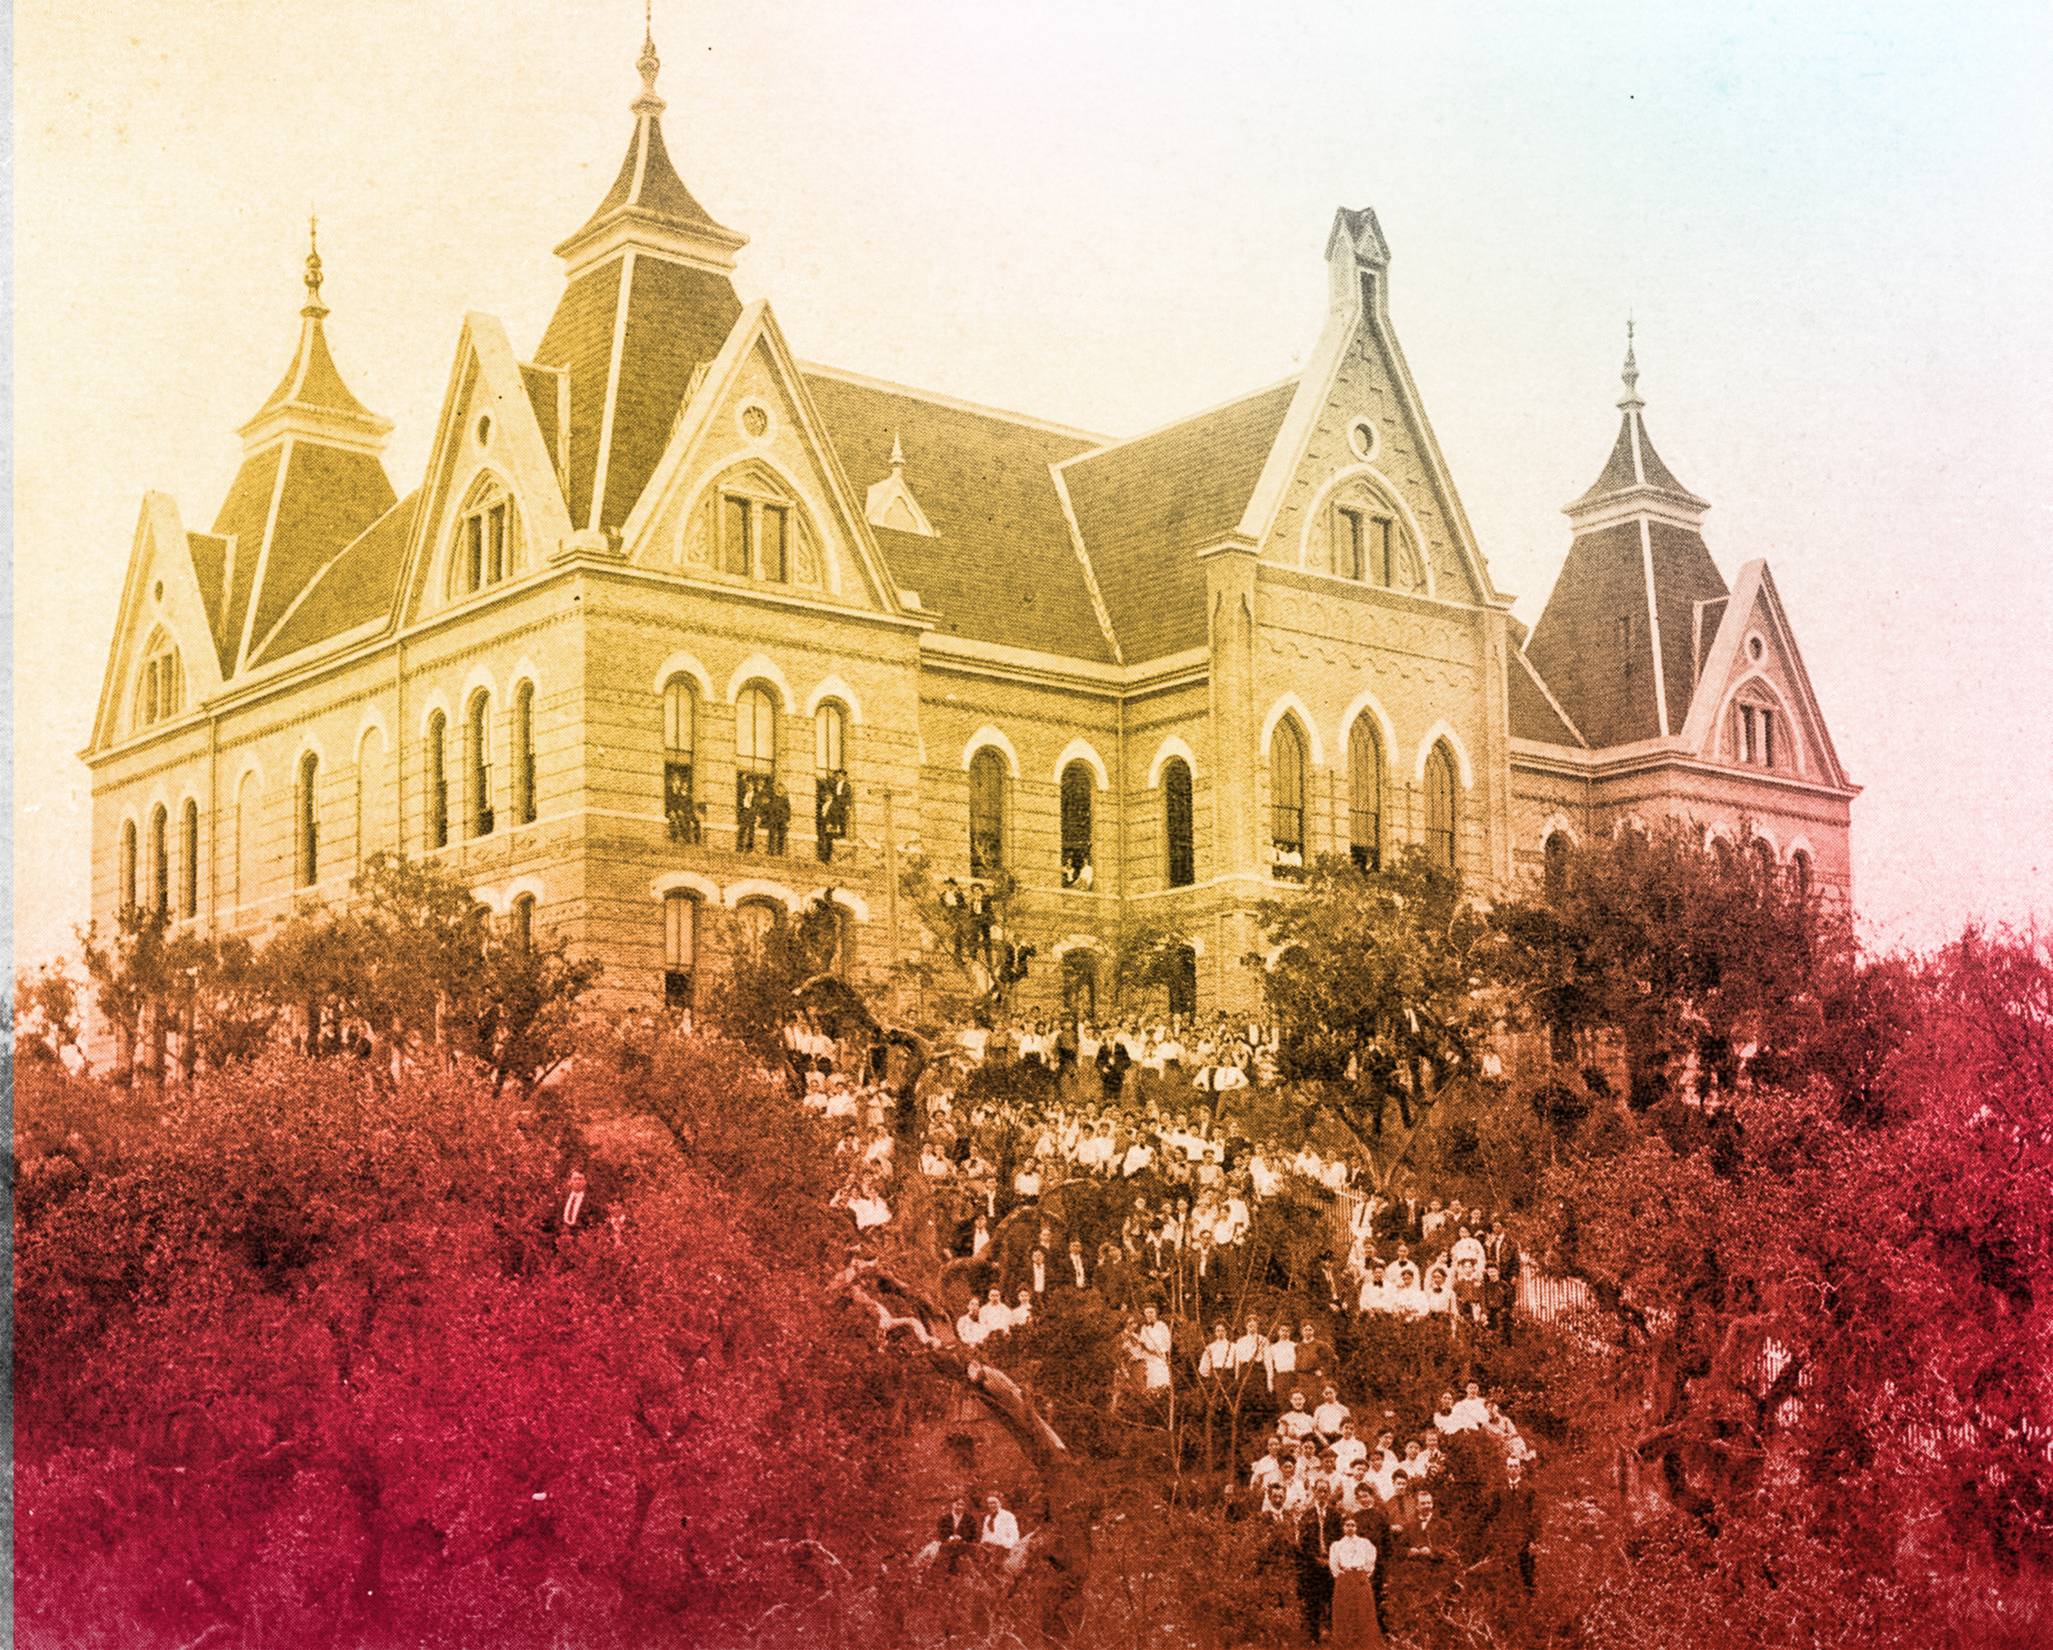 an aged black and white photo of a large building on a hill with students standing on the hill with a colorful gradient overlay